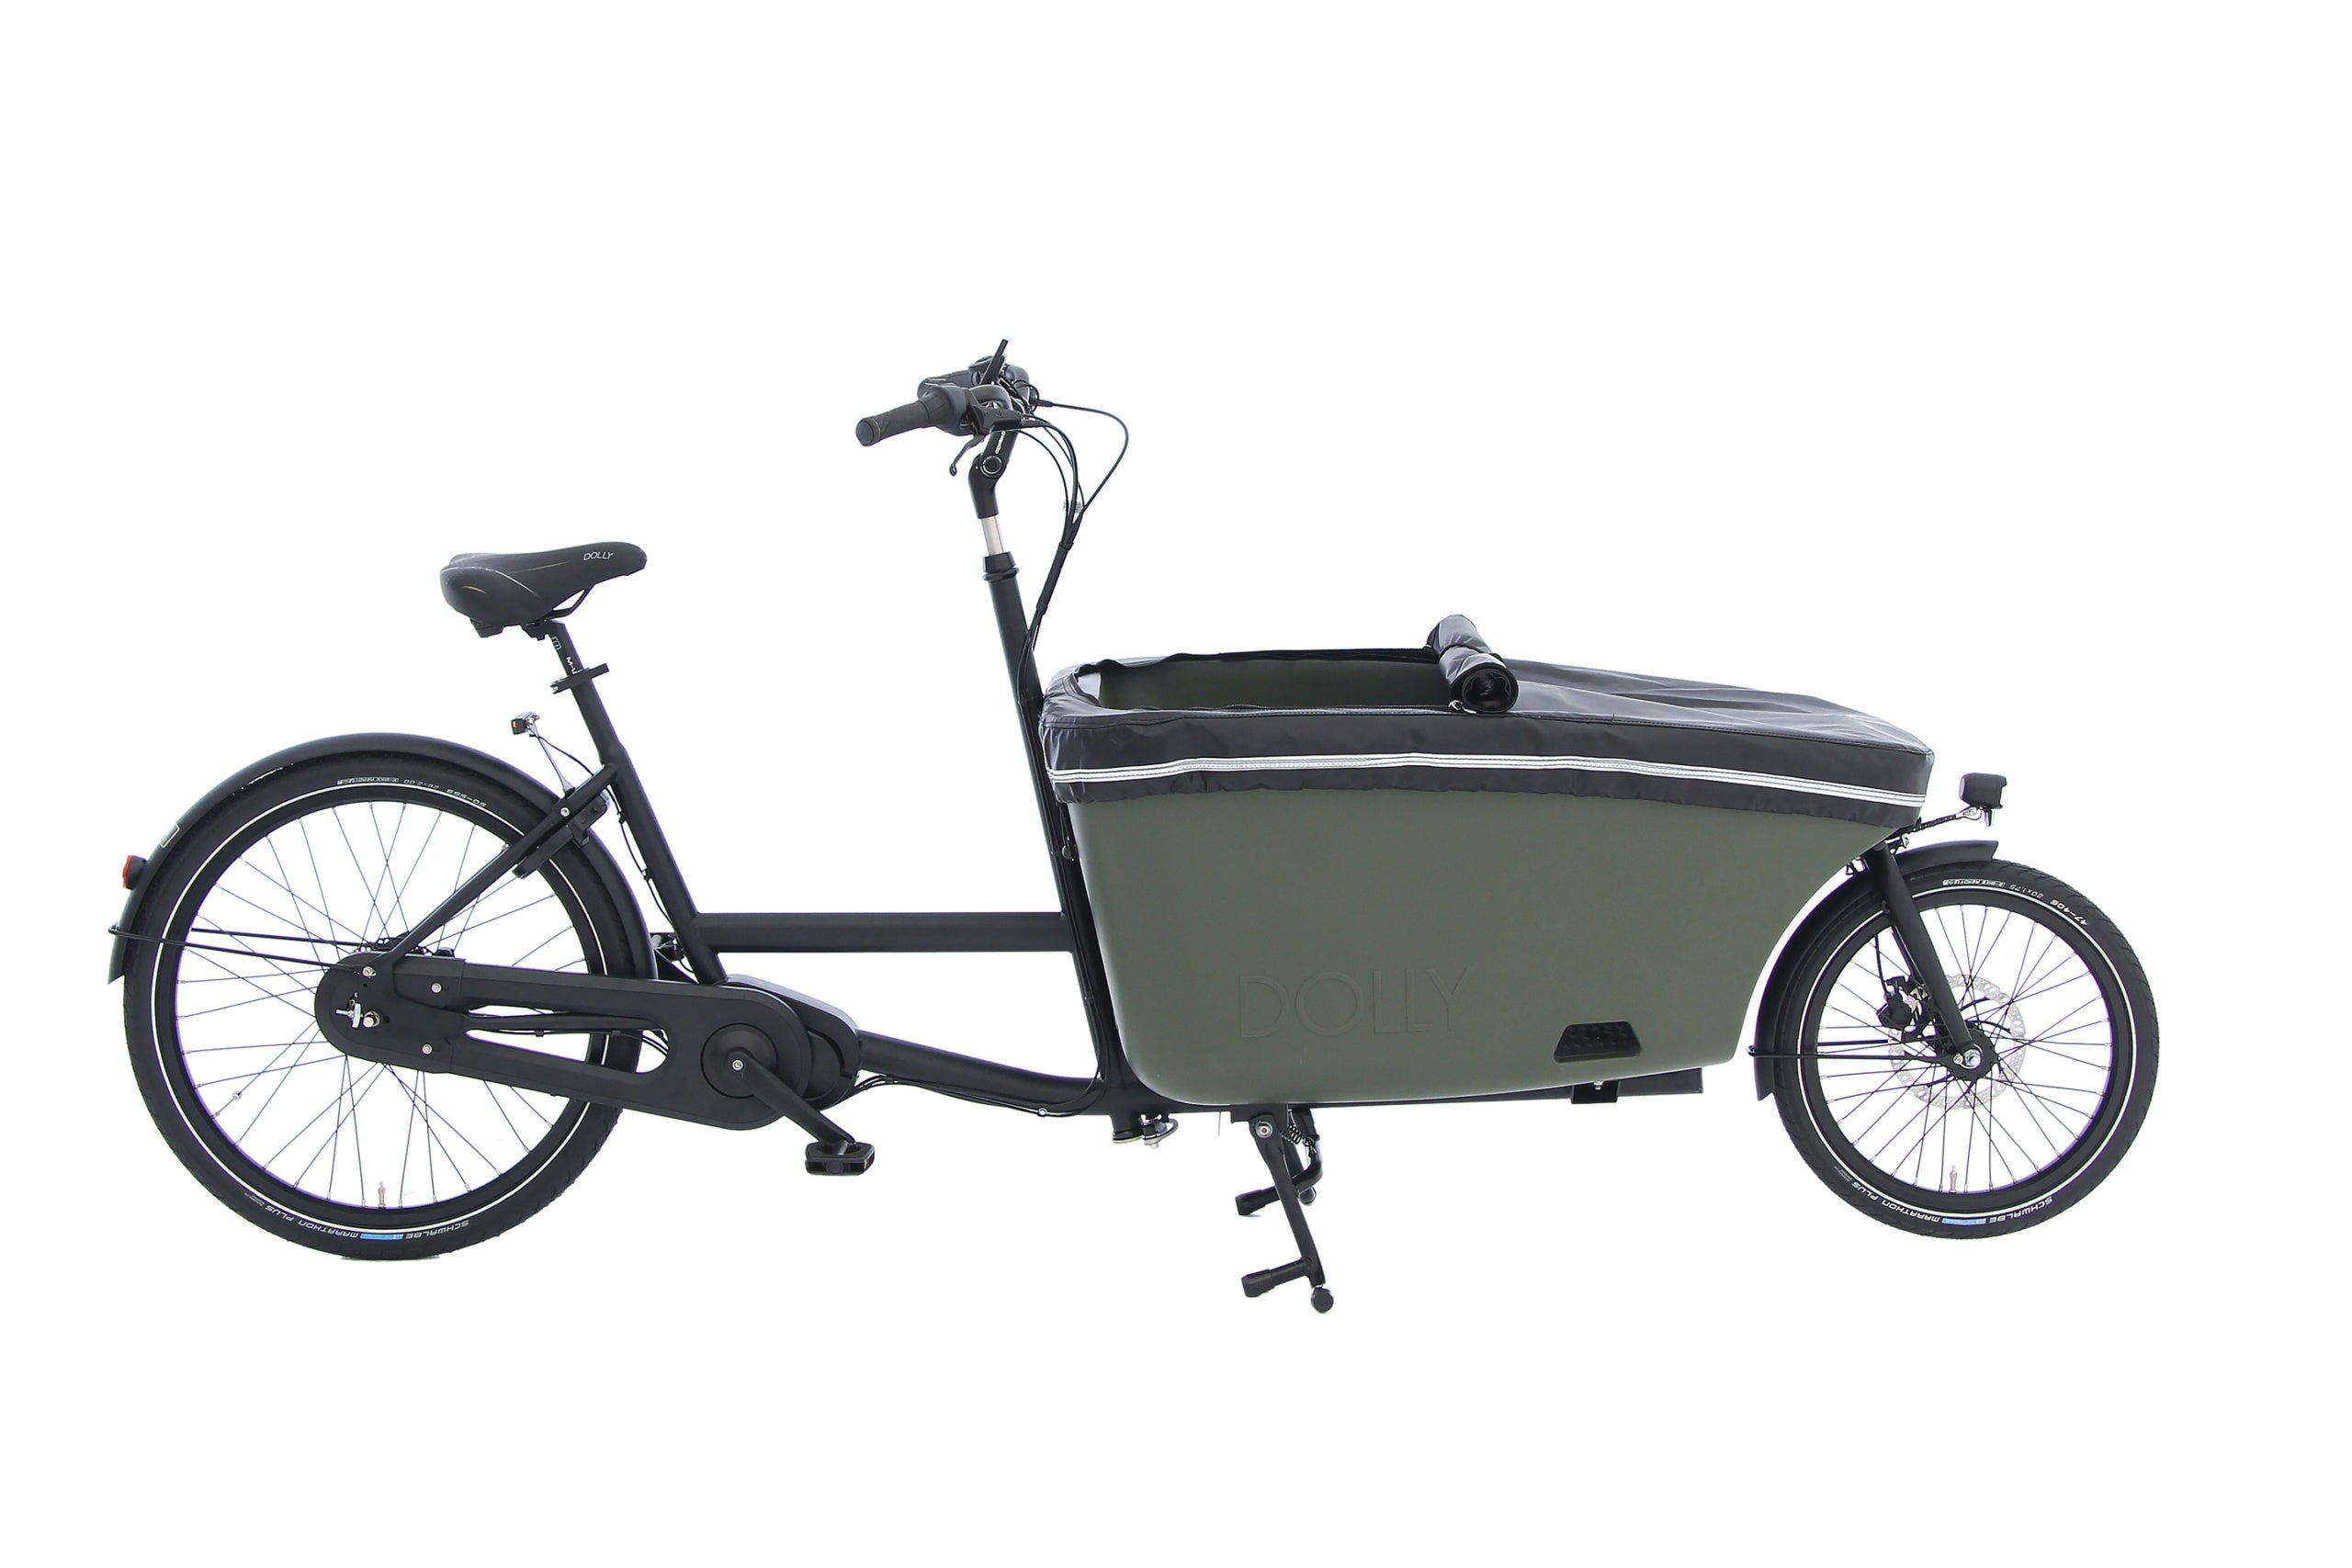 A product image showing the flat rain cover on the Dolly electric cargo bike. This photo is taken from the side of the bike.